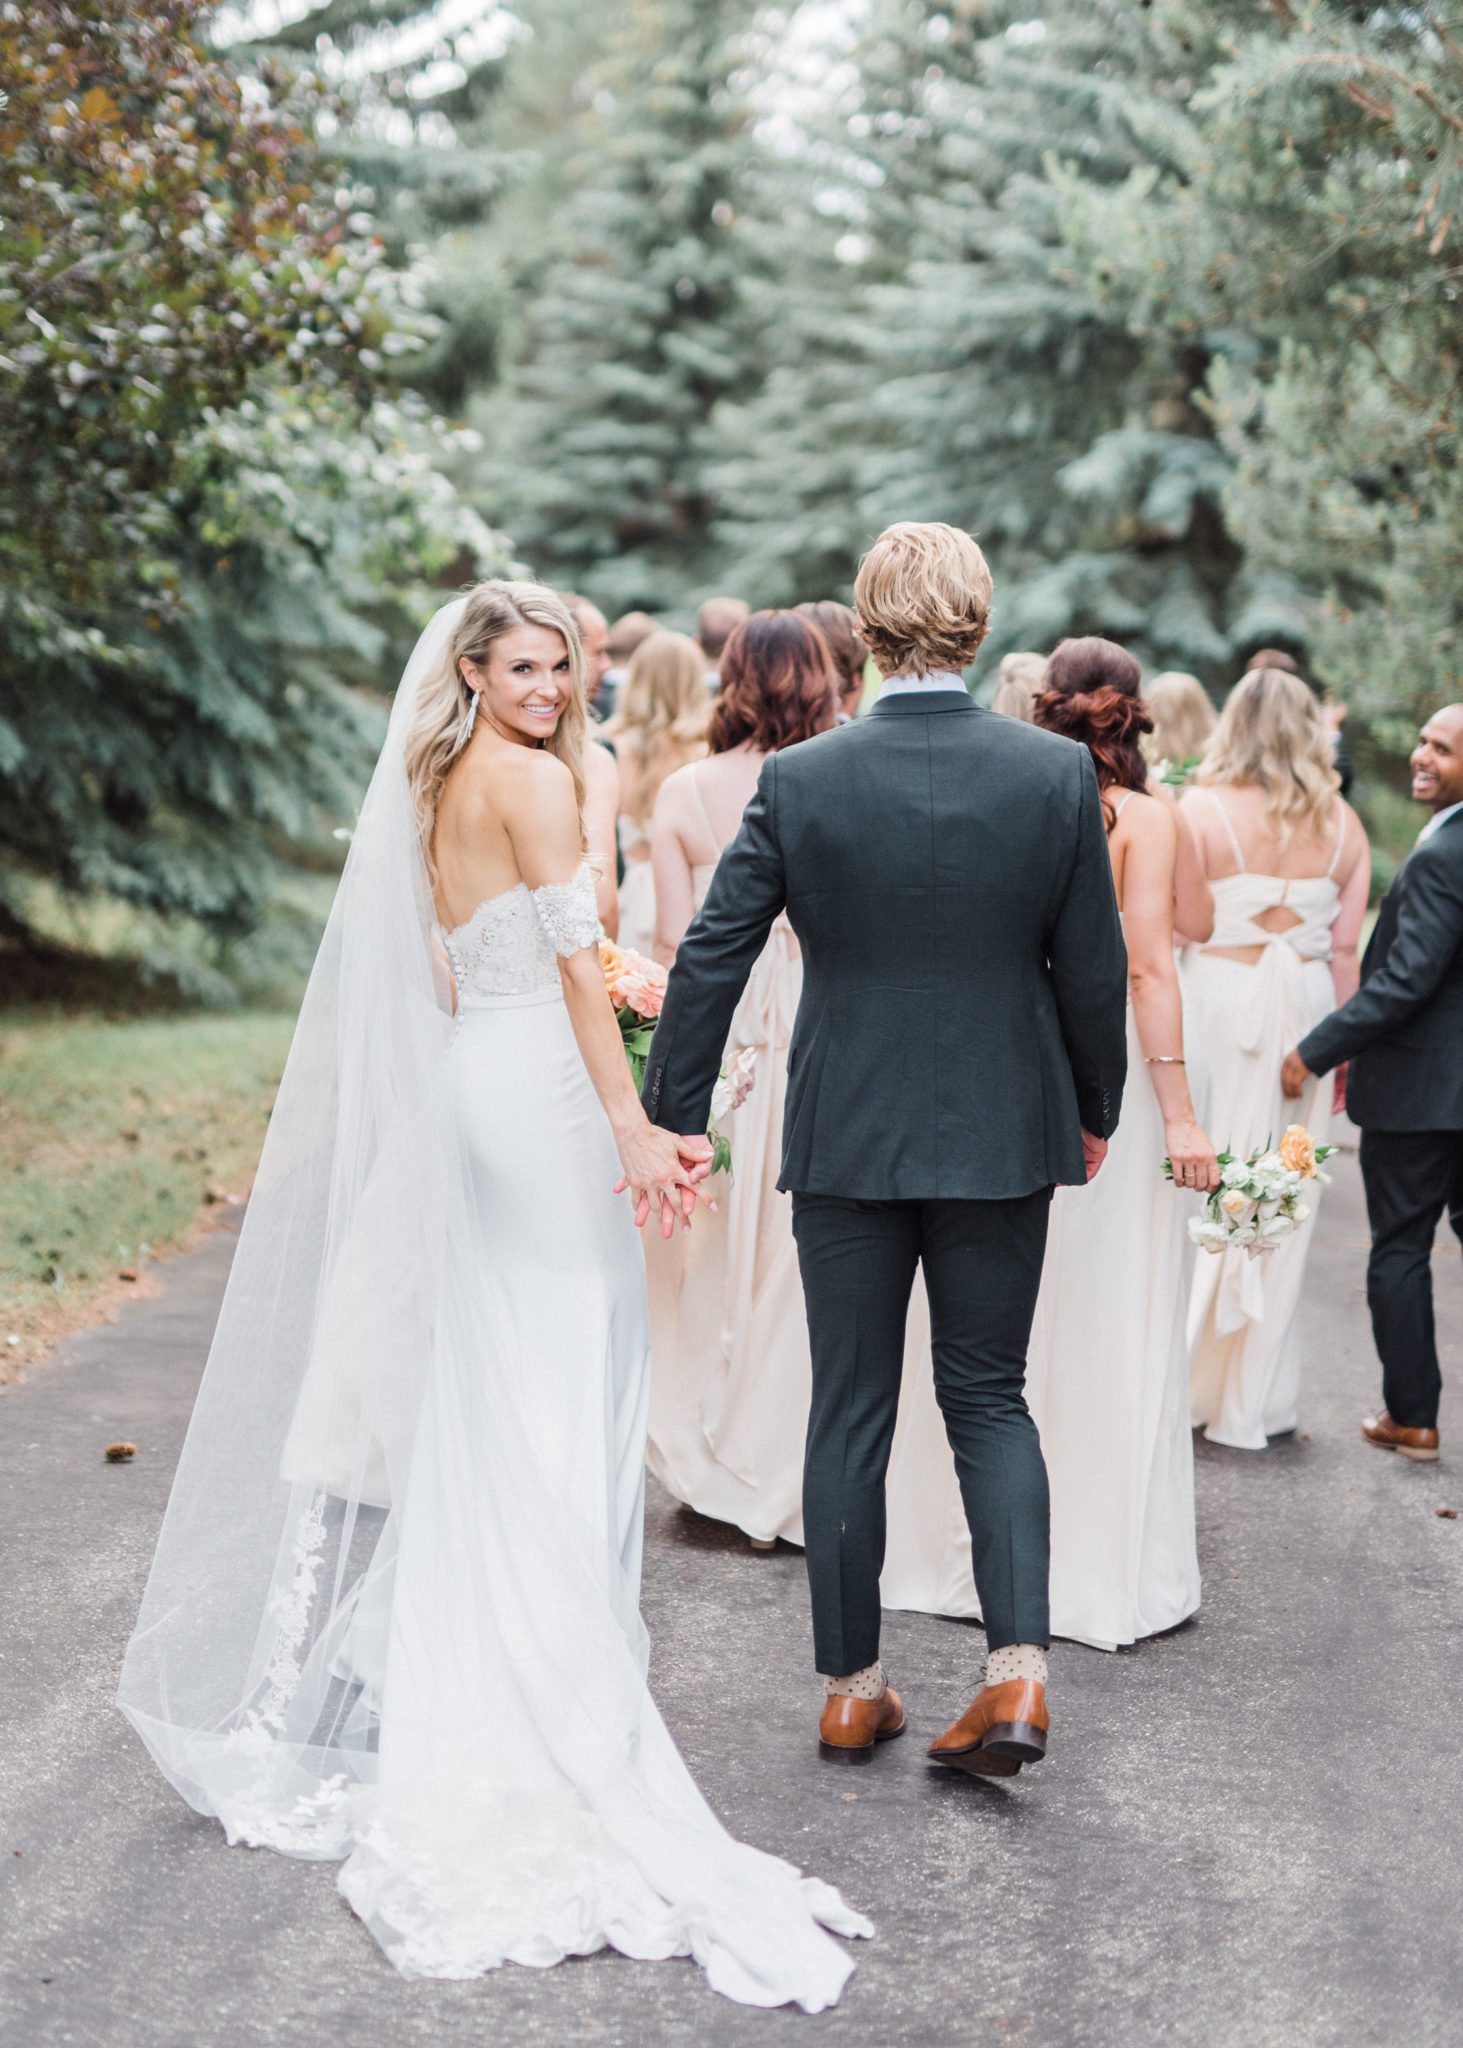 Photo inspiration for photos with your bridal party on your wedding day